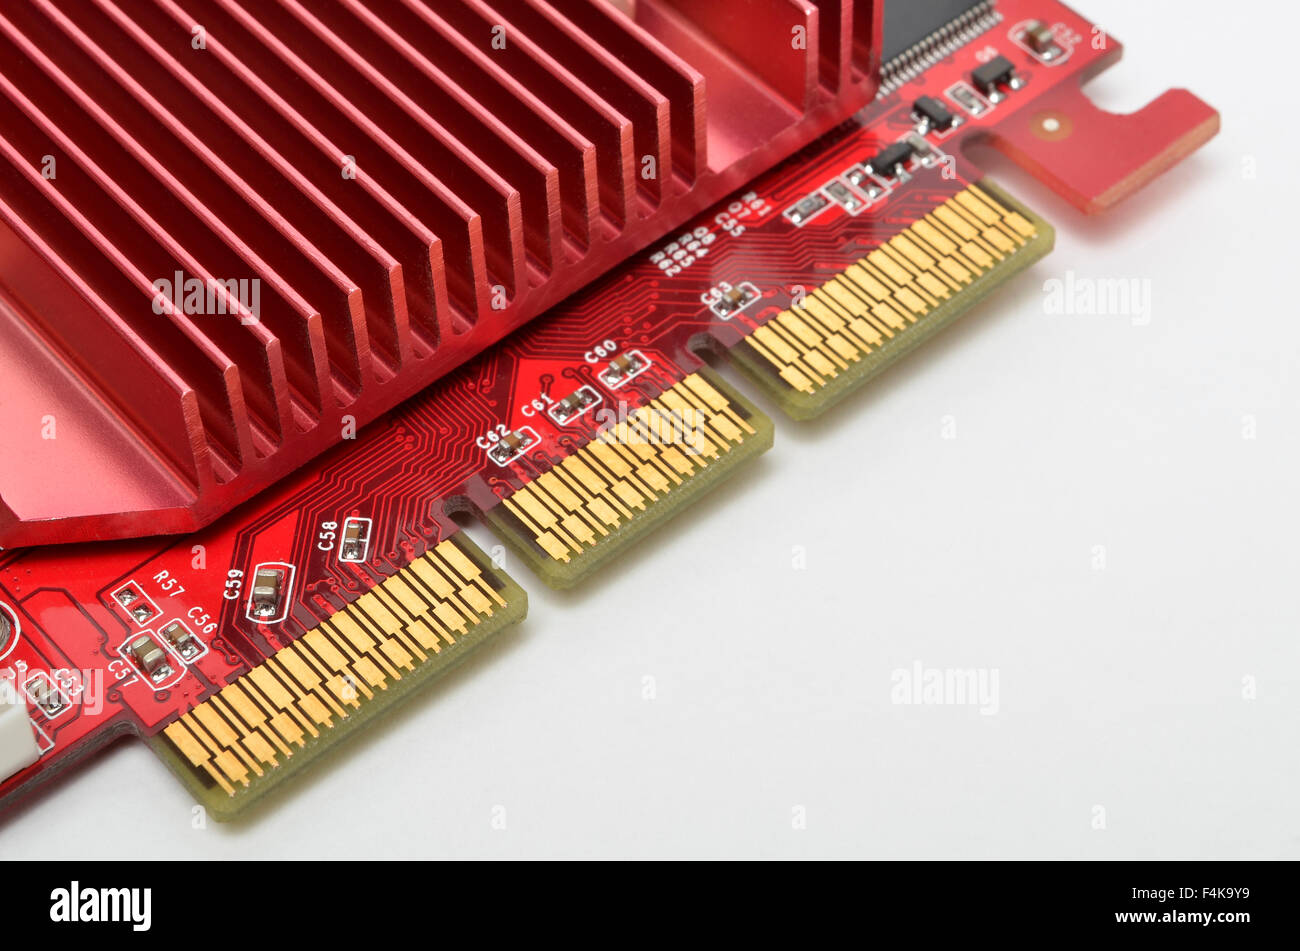 AGP contacts and heat sink on a Gainward graphics card. Stock Photo